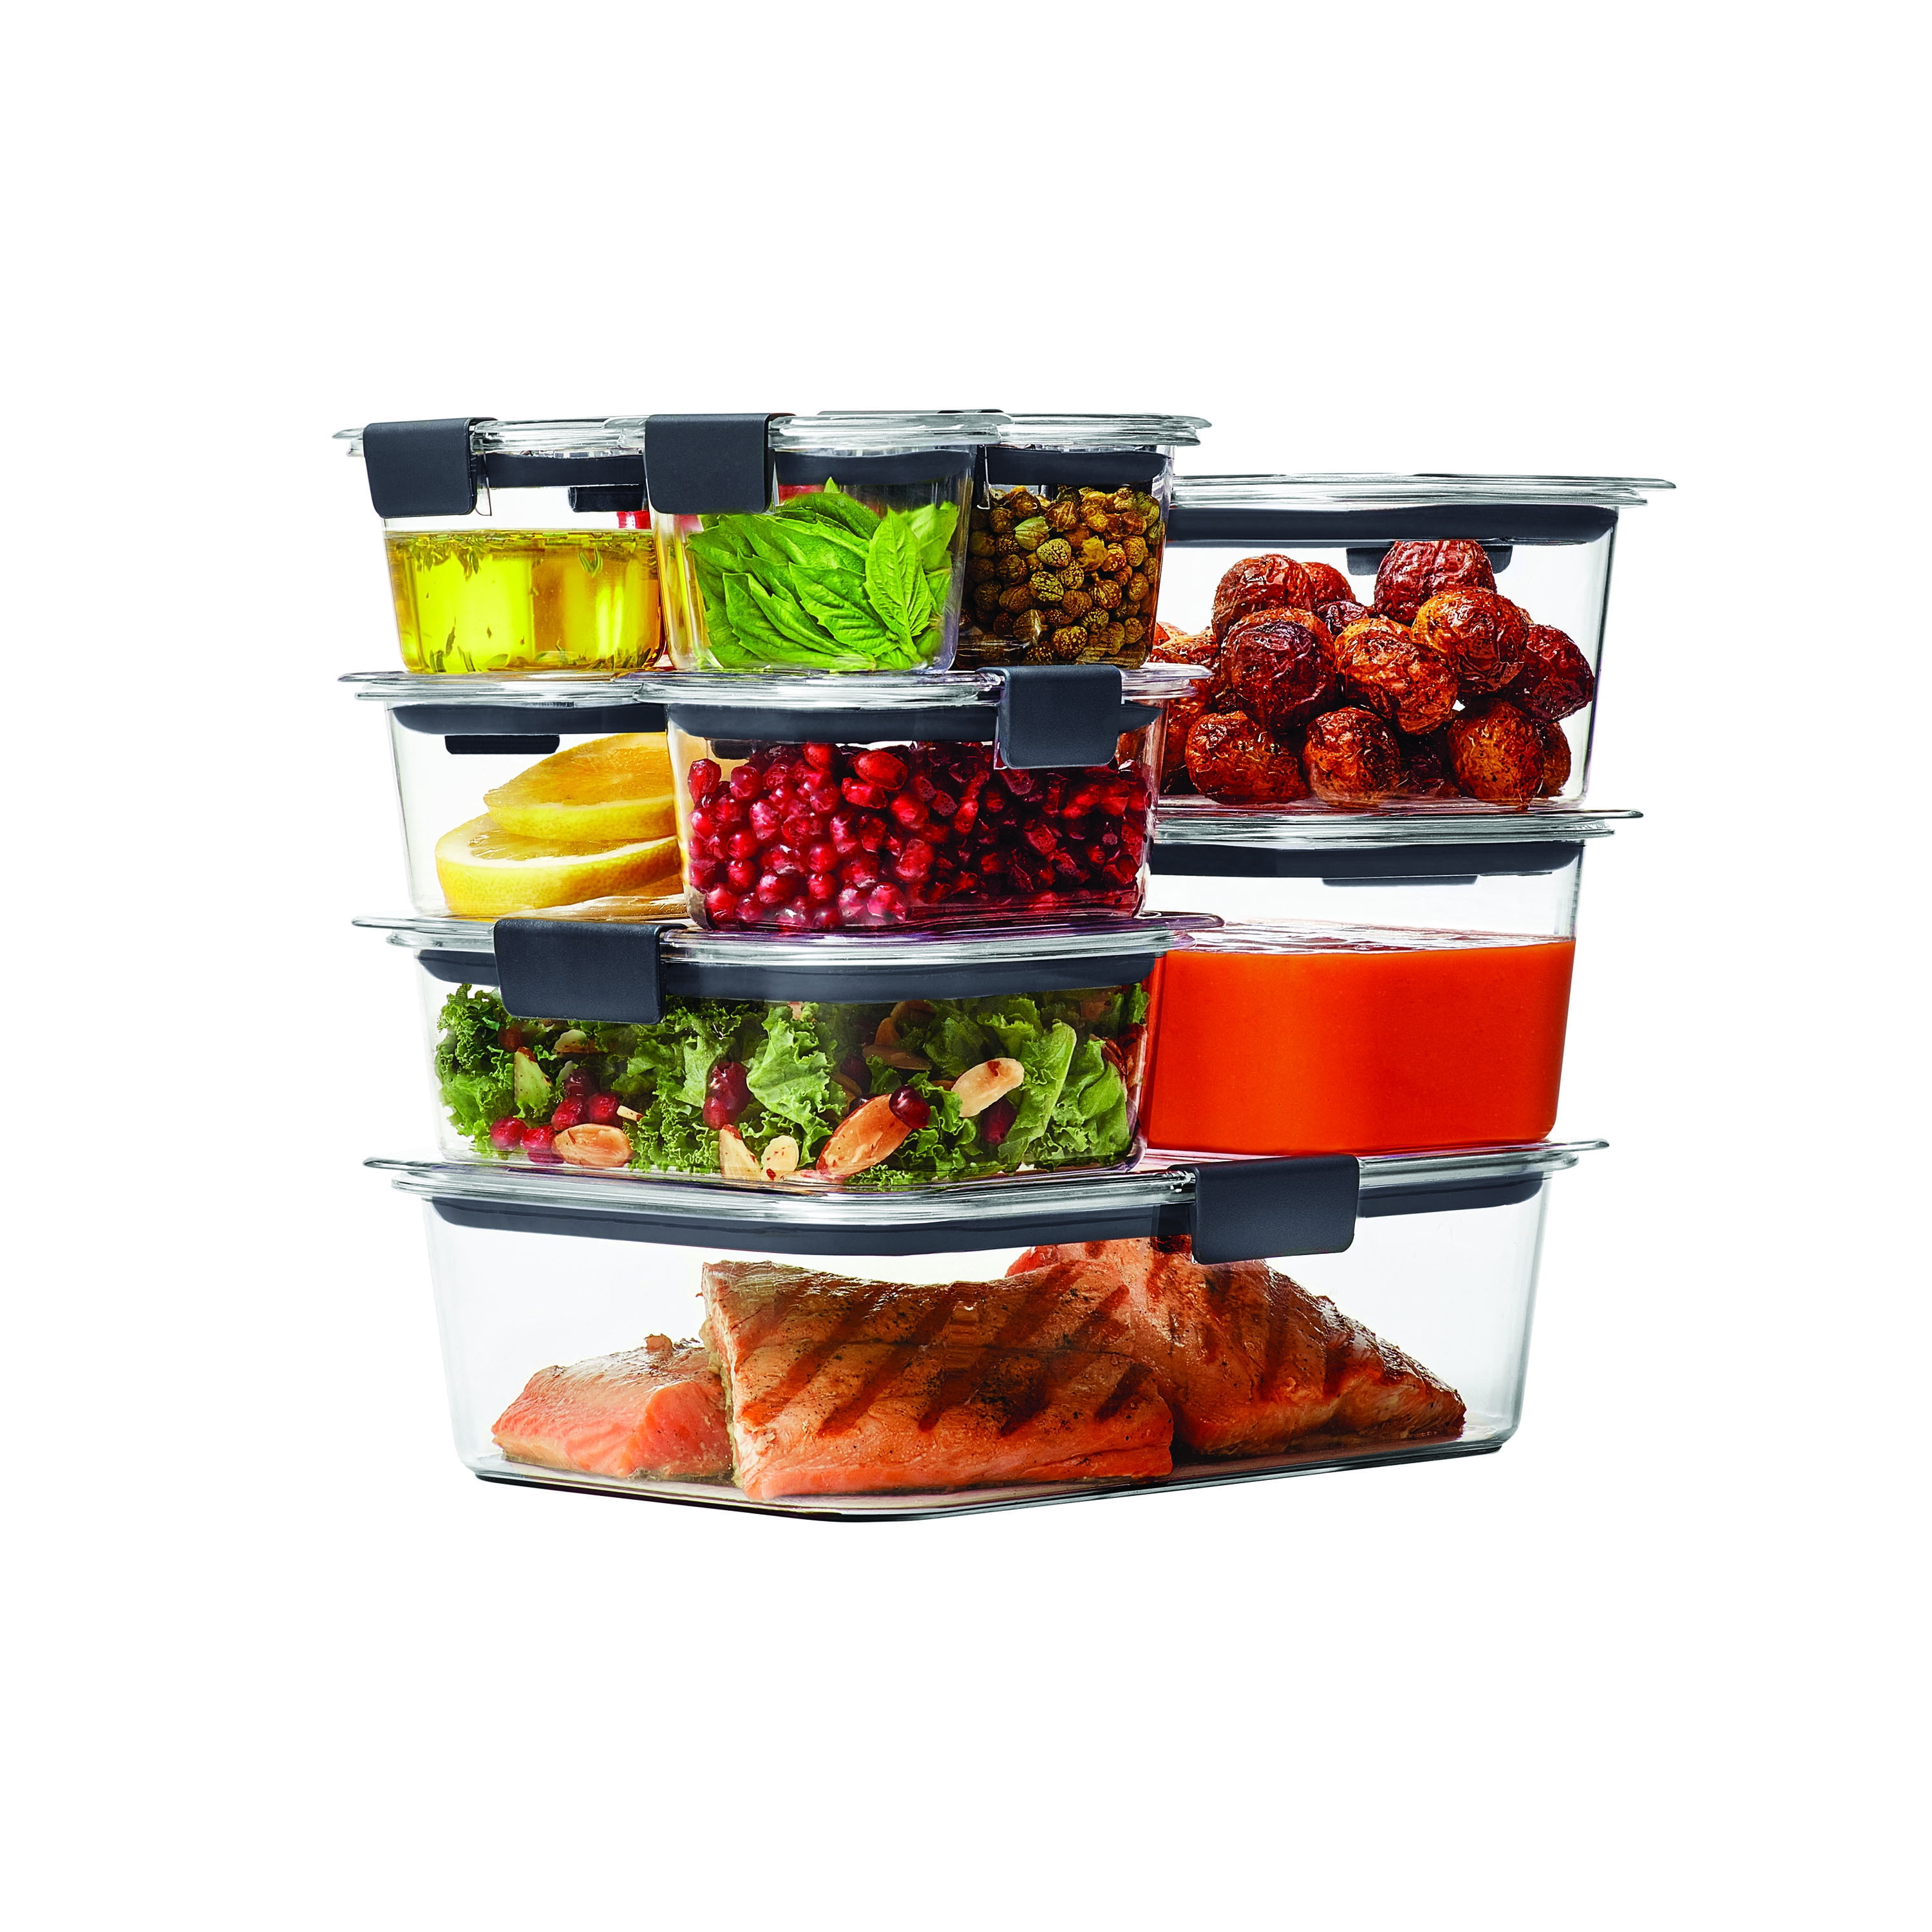 Rubbermaid Brilliance Pantry 20-Piece Set, 15 & 9-Piece Brilliance Food  Storage Containers for Pantry with Lids and Scoops for Flour, Sugar, and